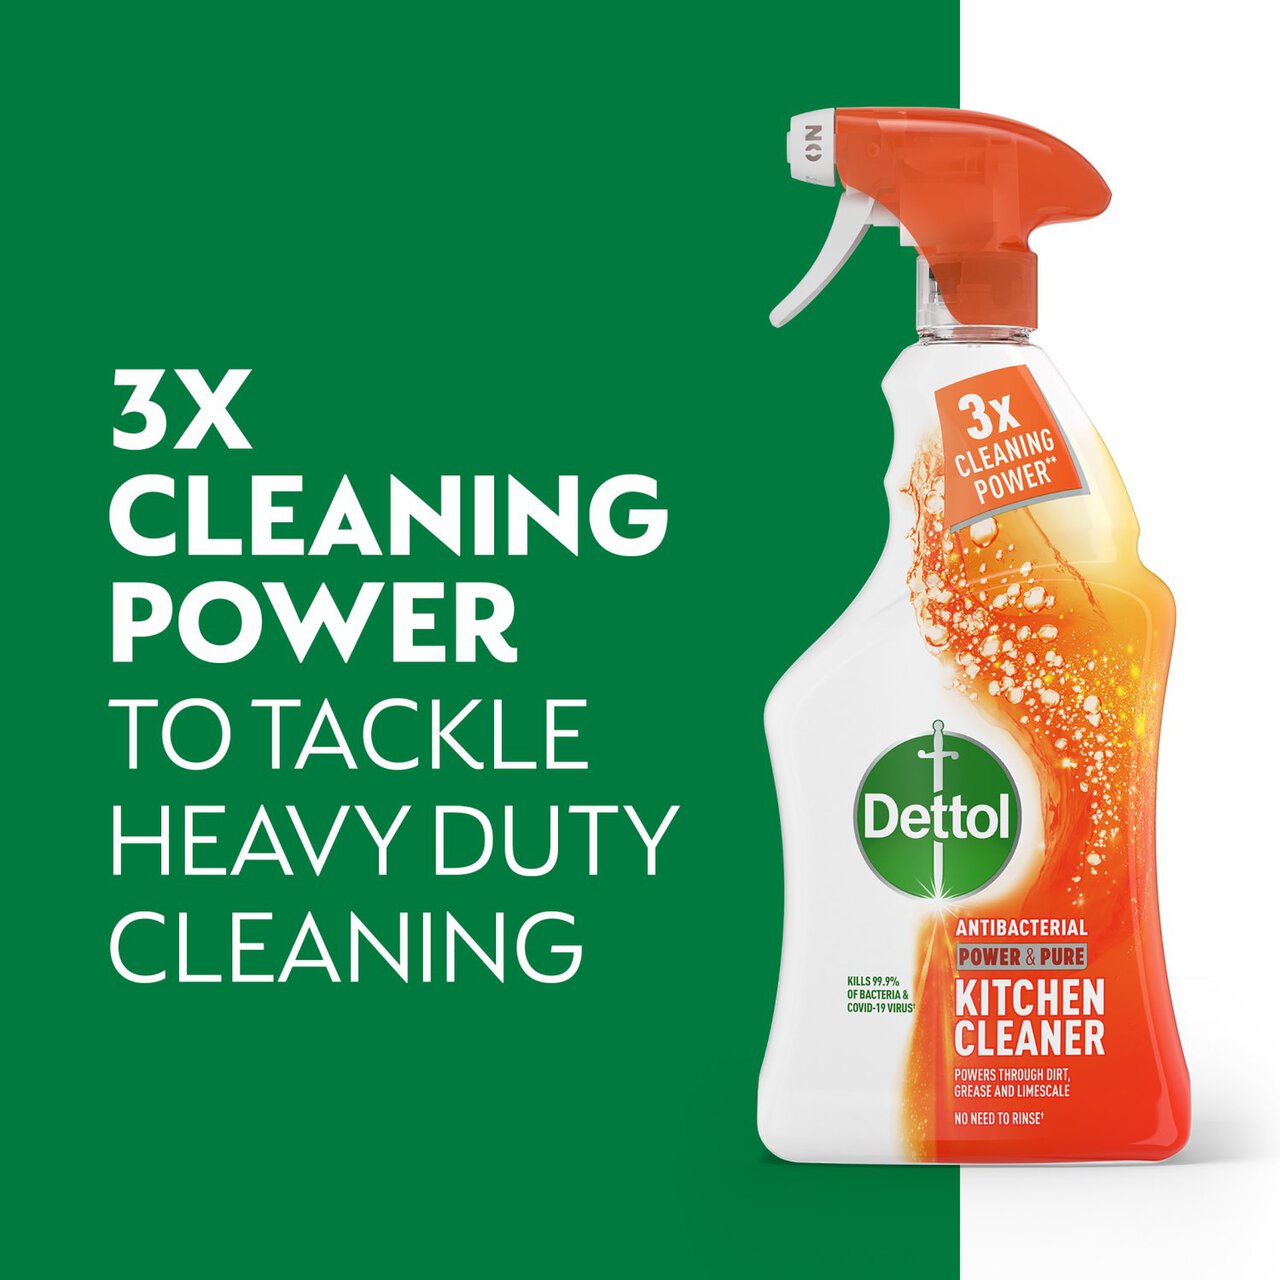 Dettol Antibacterial Disinfectant Kitchen Cleaning Spray 750ml